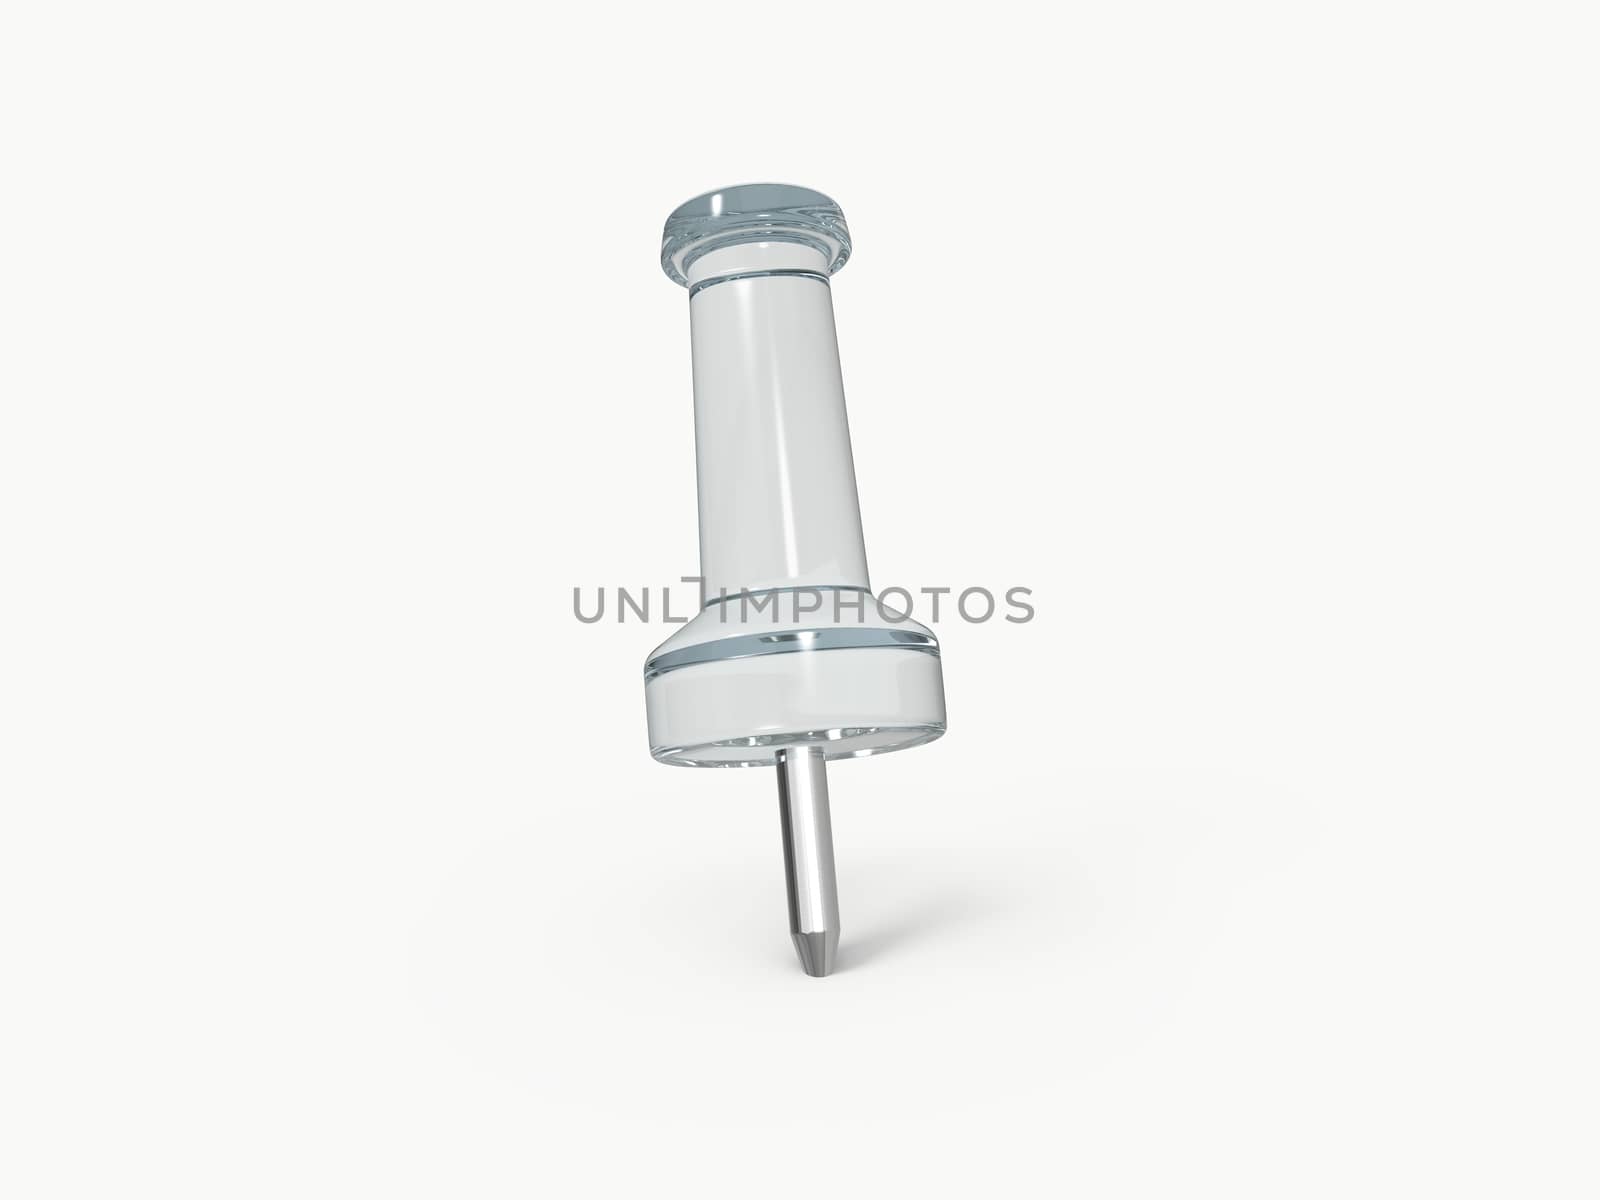 Blue transparency push pin, isolated on white background.